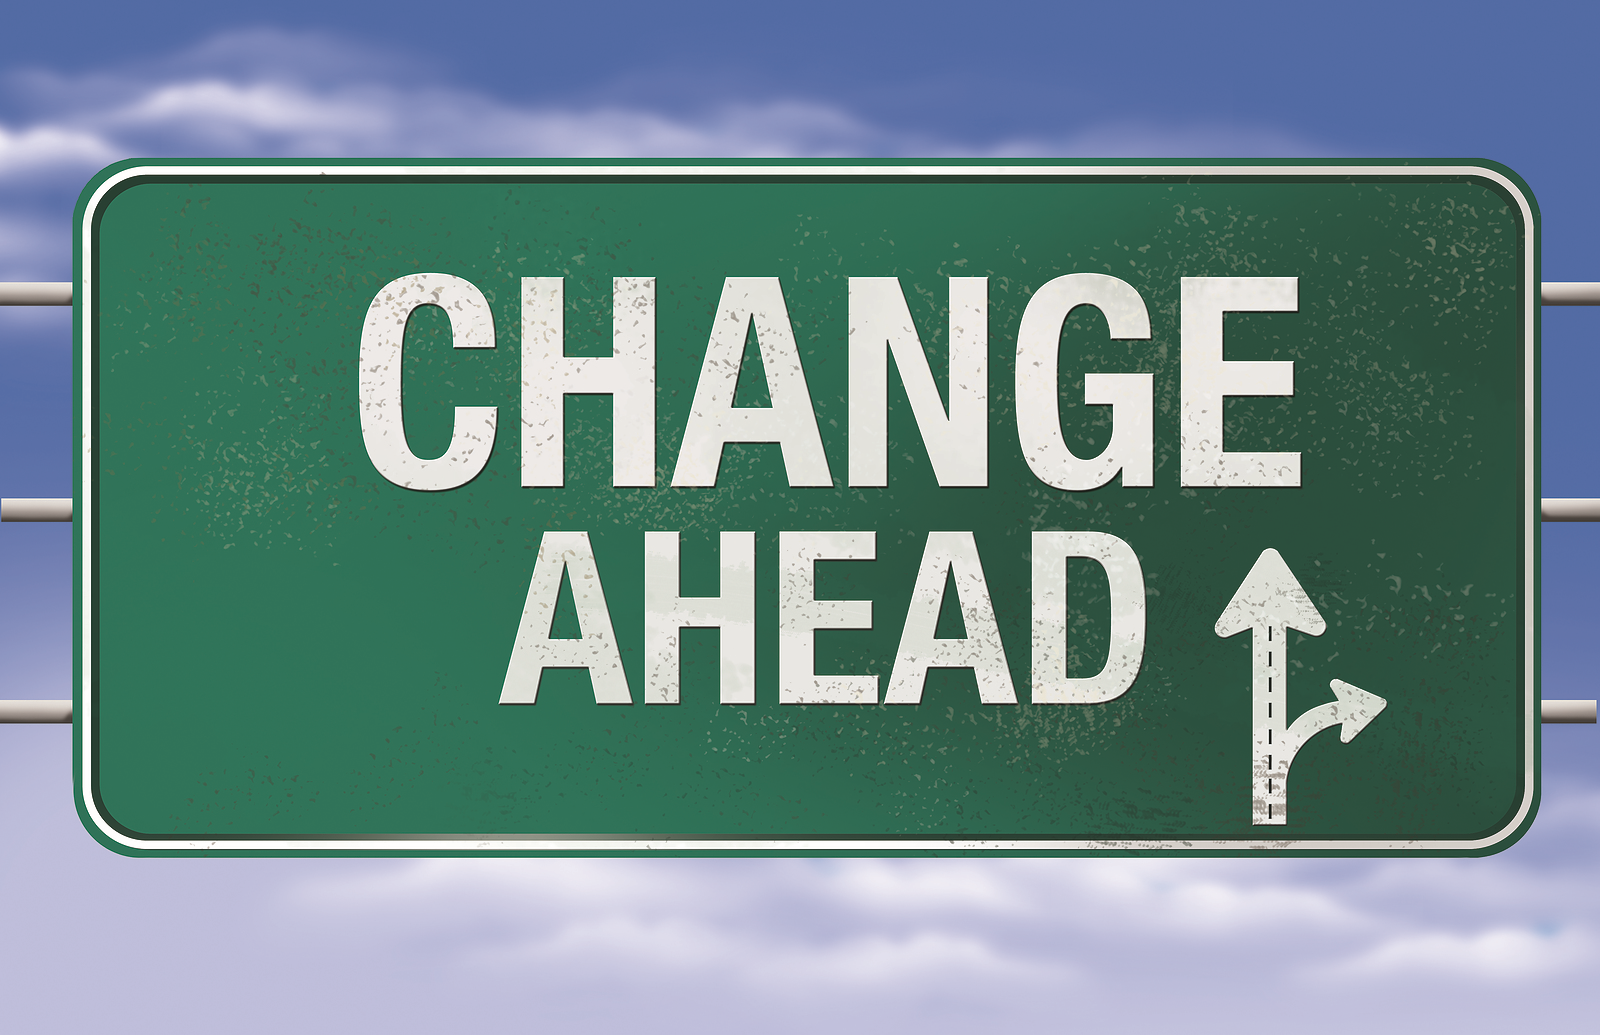 Change Ahead - Why We Don't Need Corporate Offices